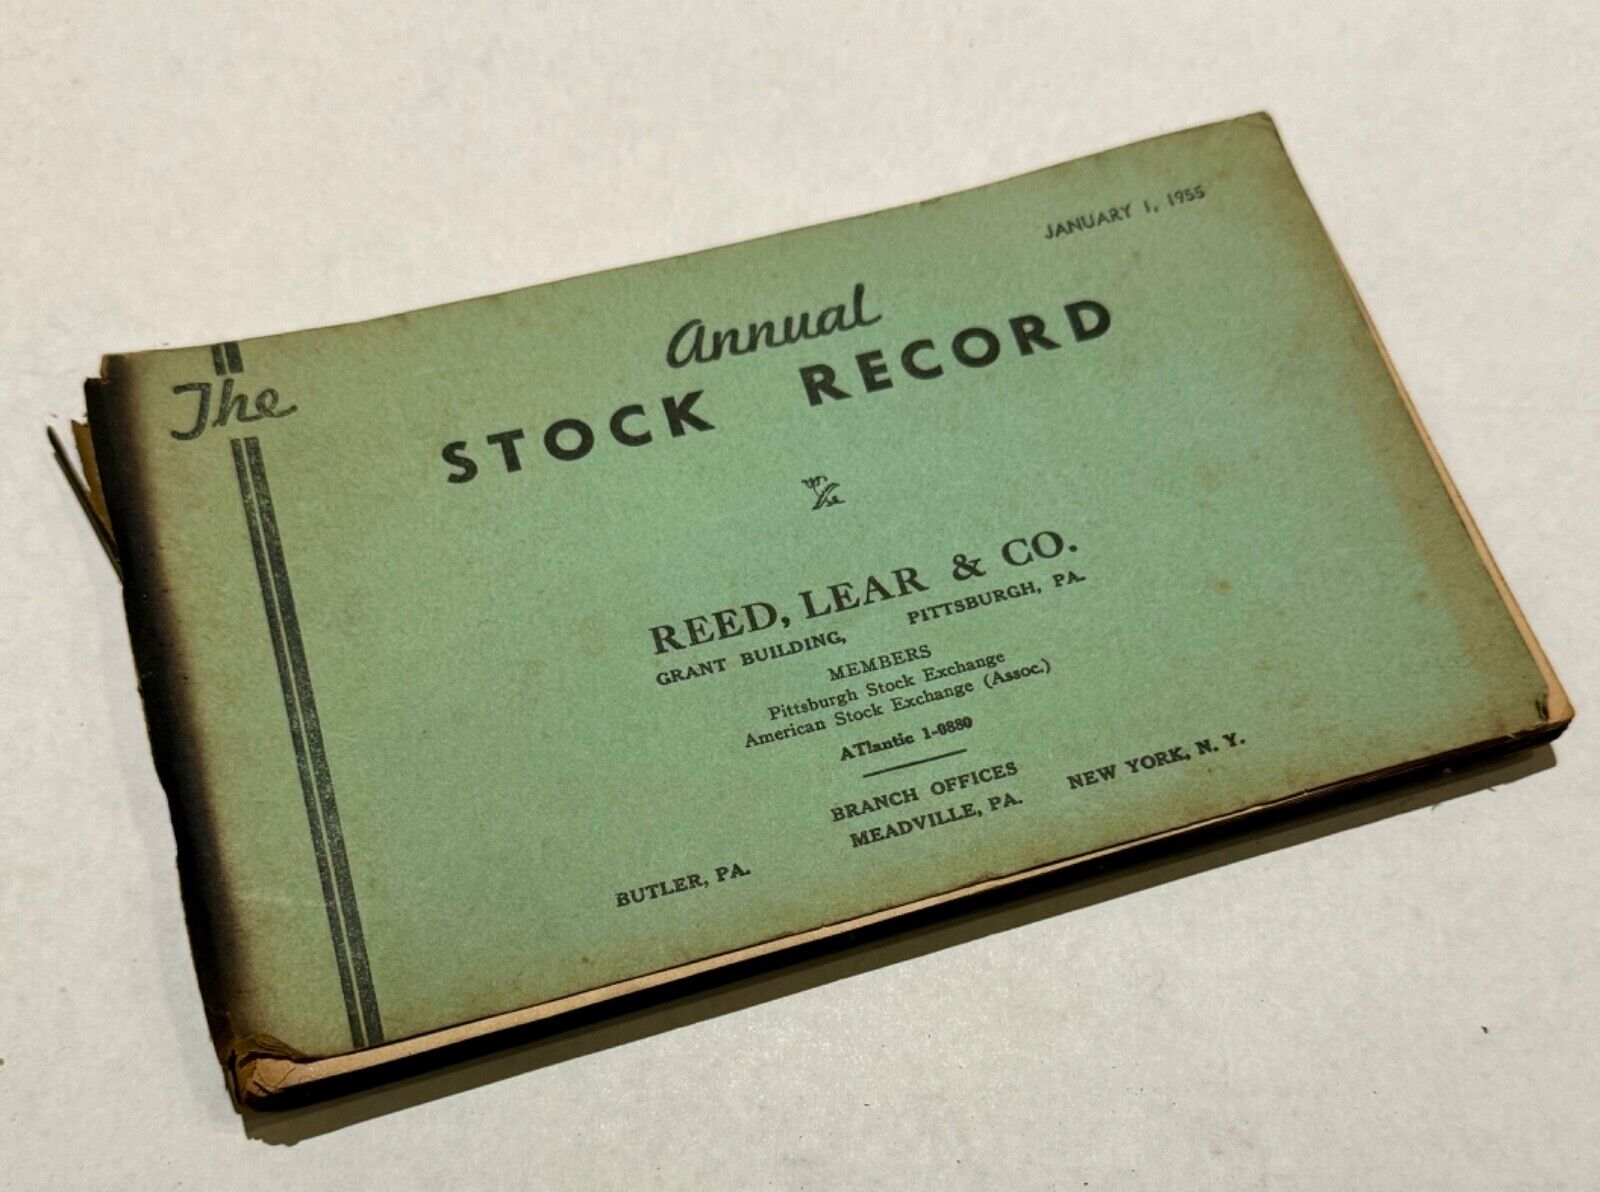 COOL RARE Fitch Annual Stock Record January 1, 1955 STOCK EXCHANGE NYSE OTC